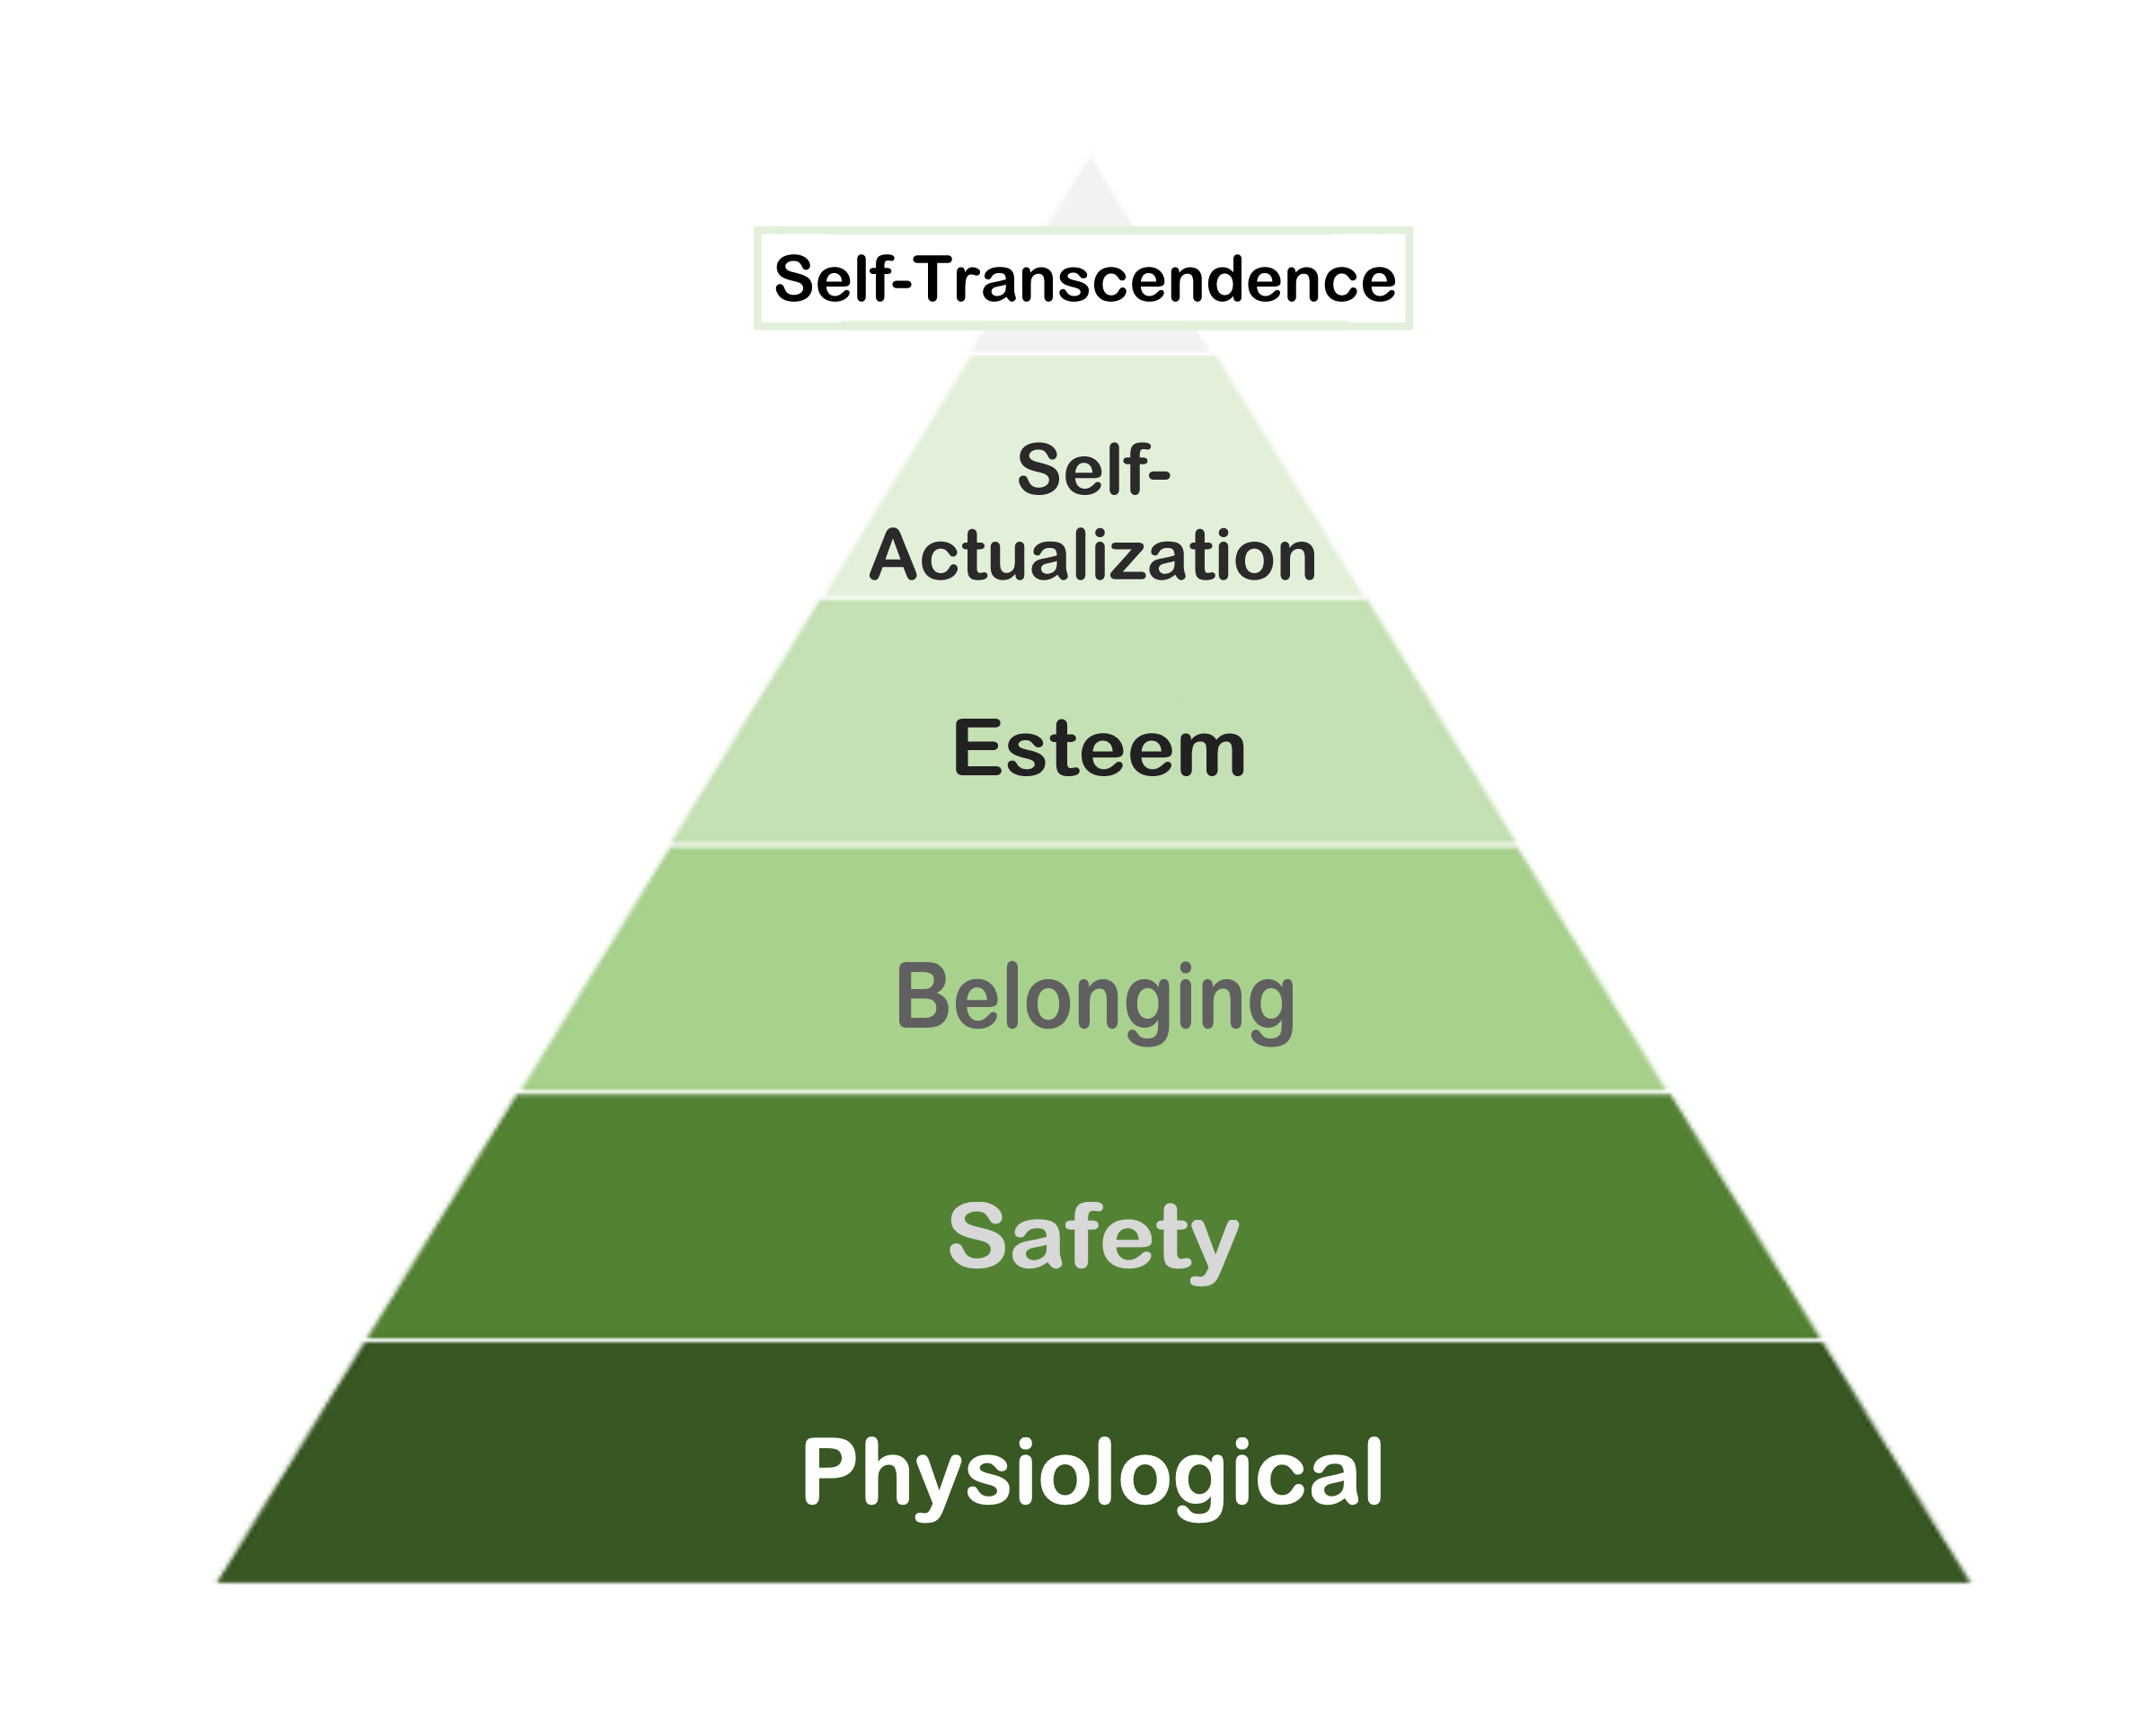 A green triangle with six layers. From bottom to top, the layers are labeled ‘physiological’, ‘safety’, ‘belonging’, ‘esteem’, ‘self-actualization’, and ‘self-transcendence’.